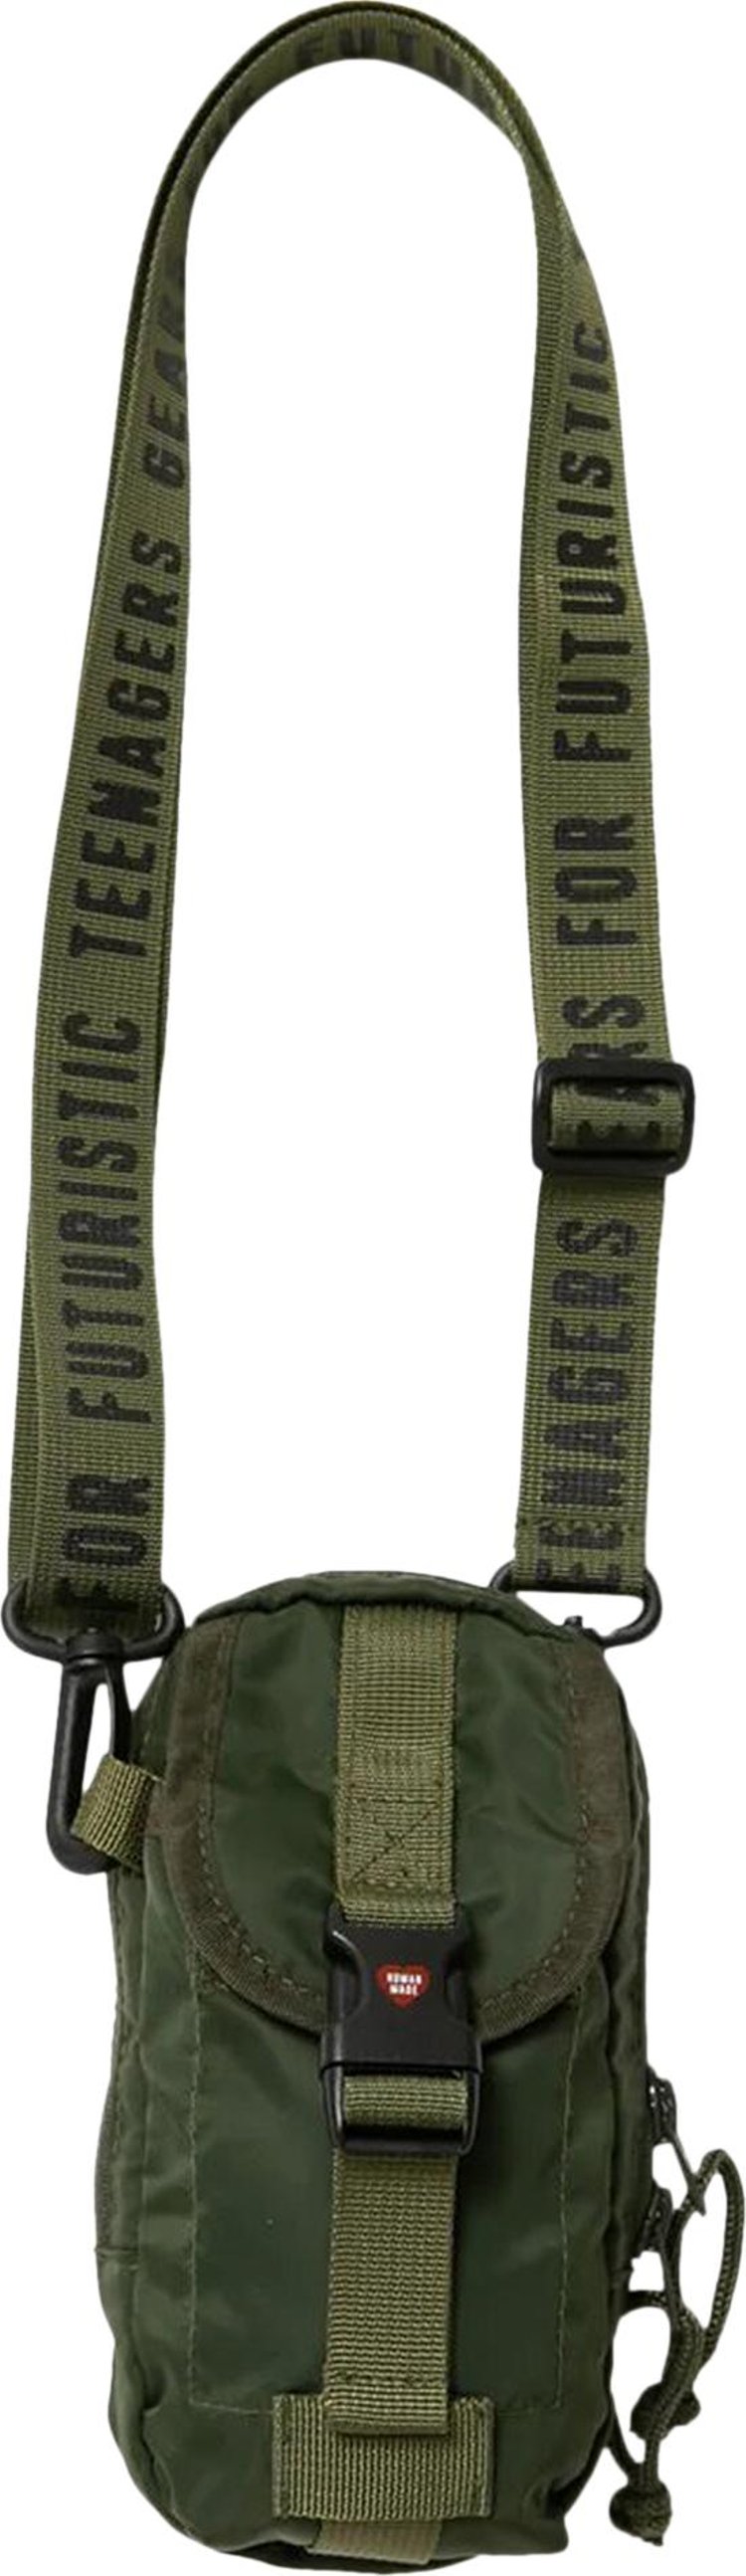 Human Made Military Pouch #3 'Olive Drab'